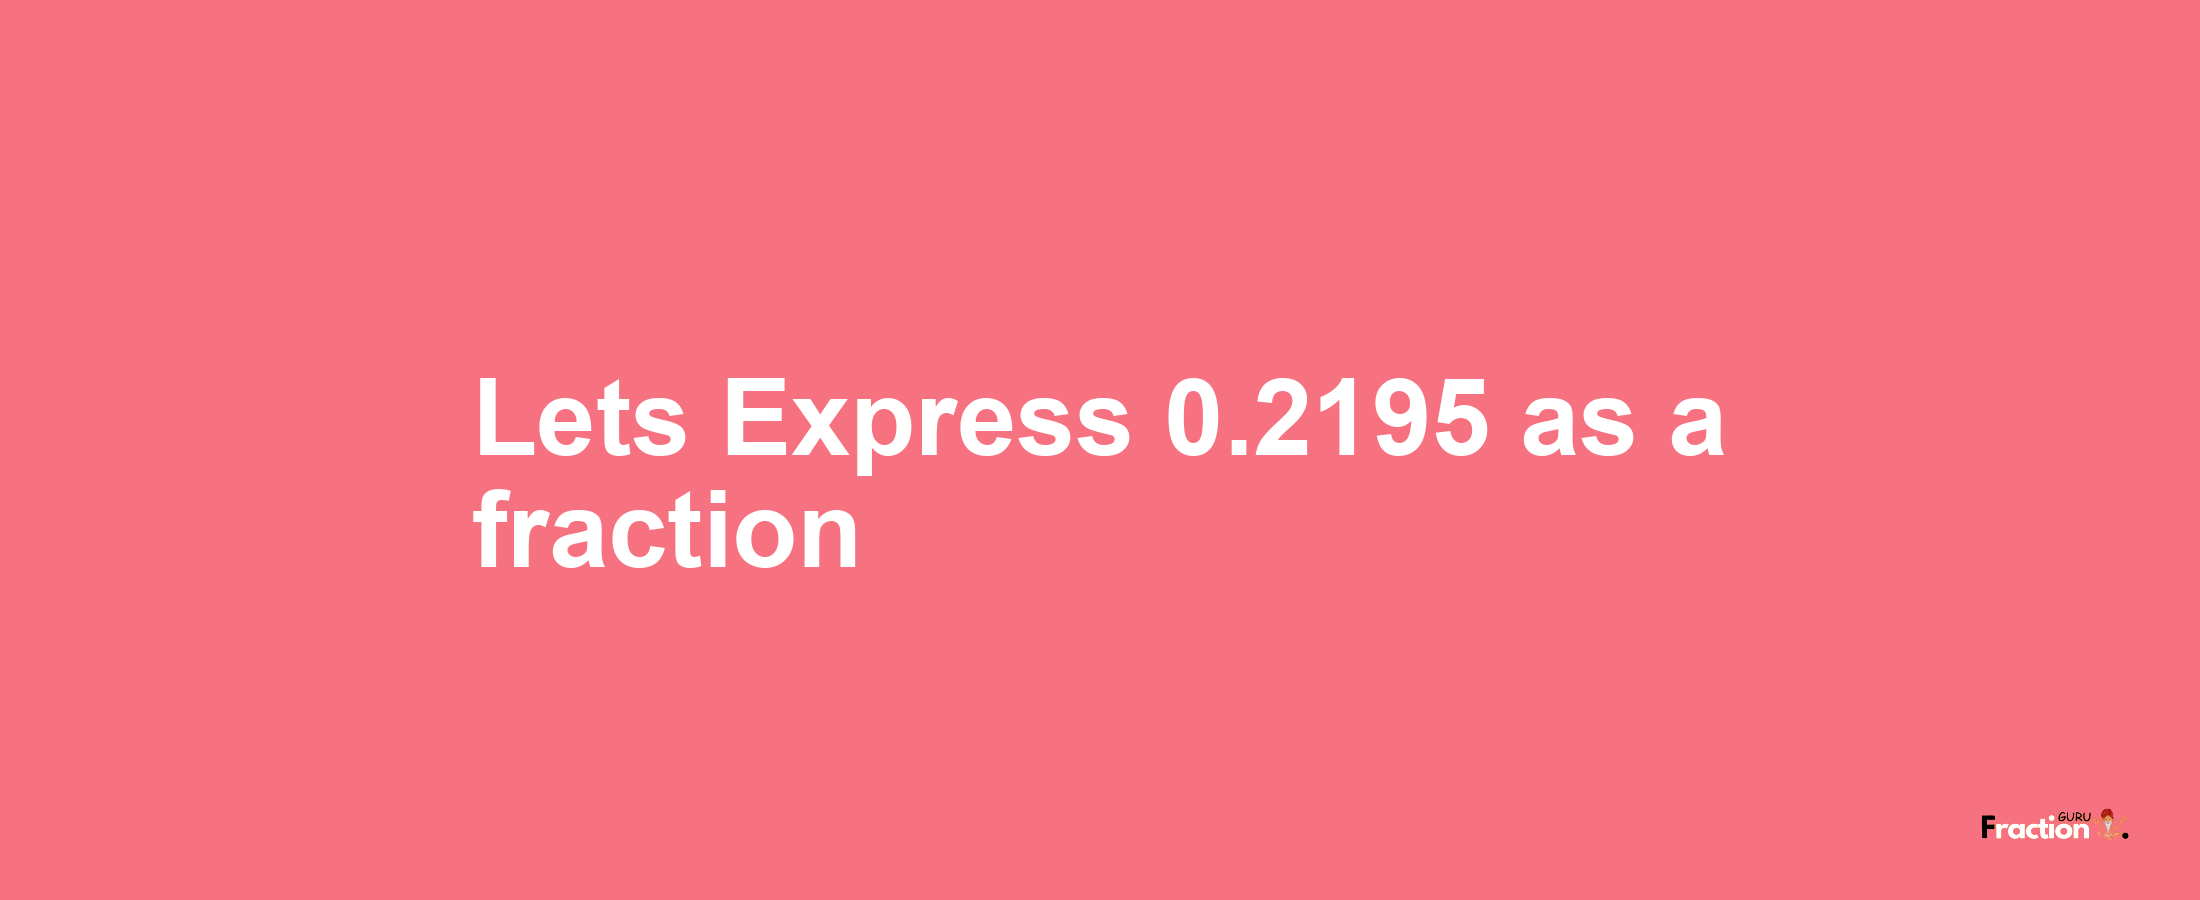 Lets Express 0.2195 as afraction